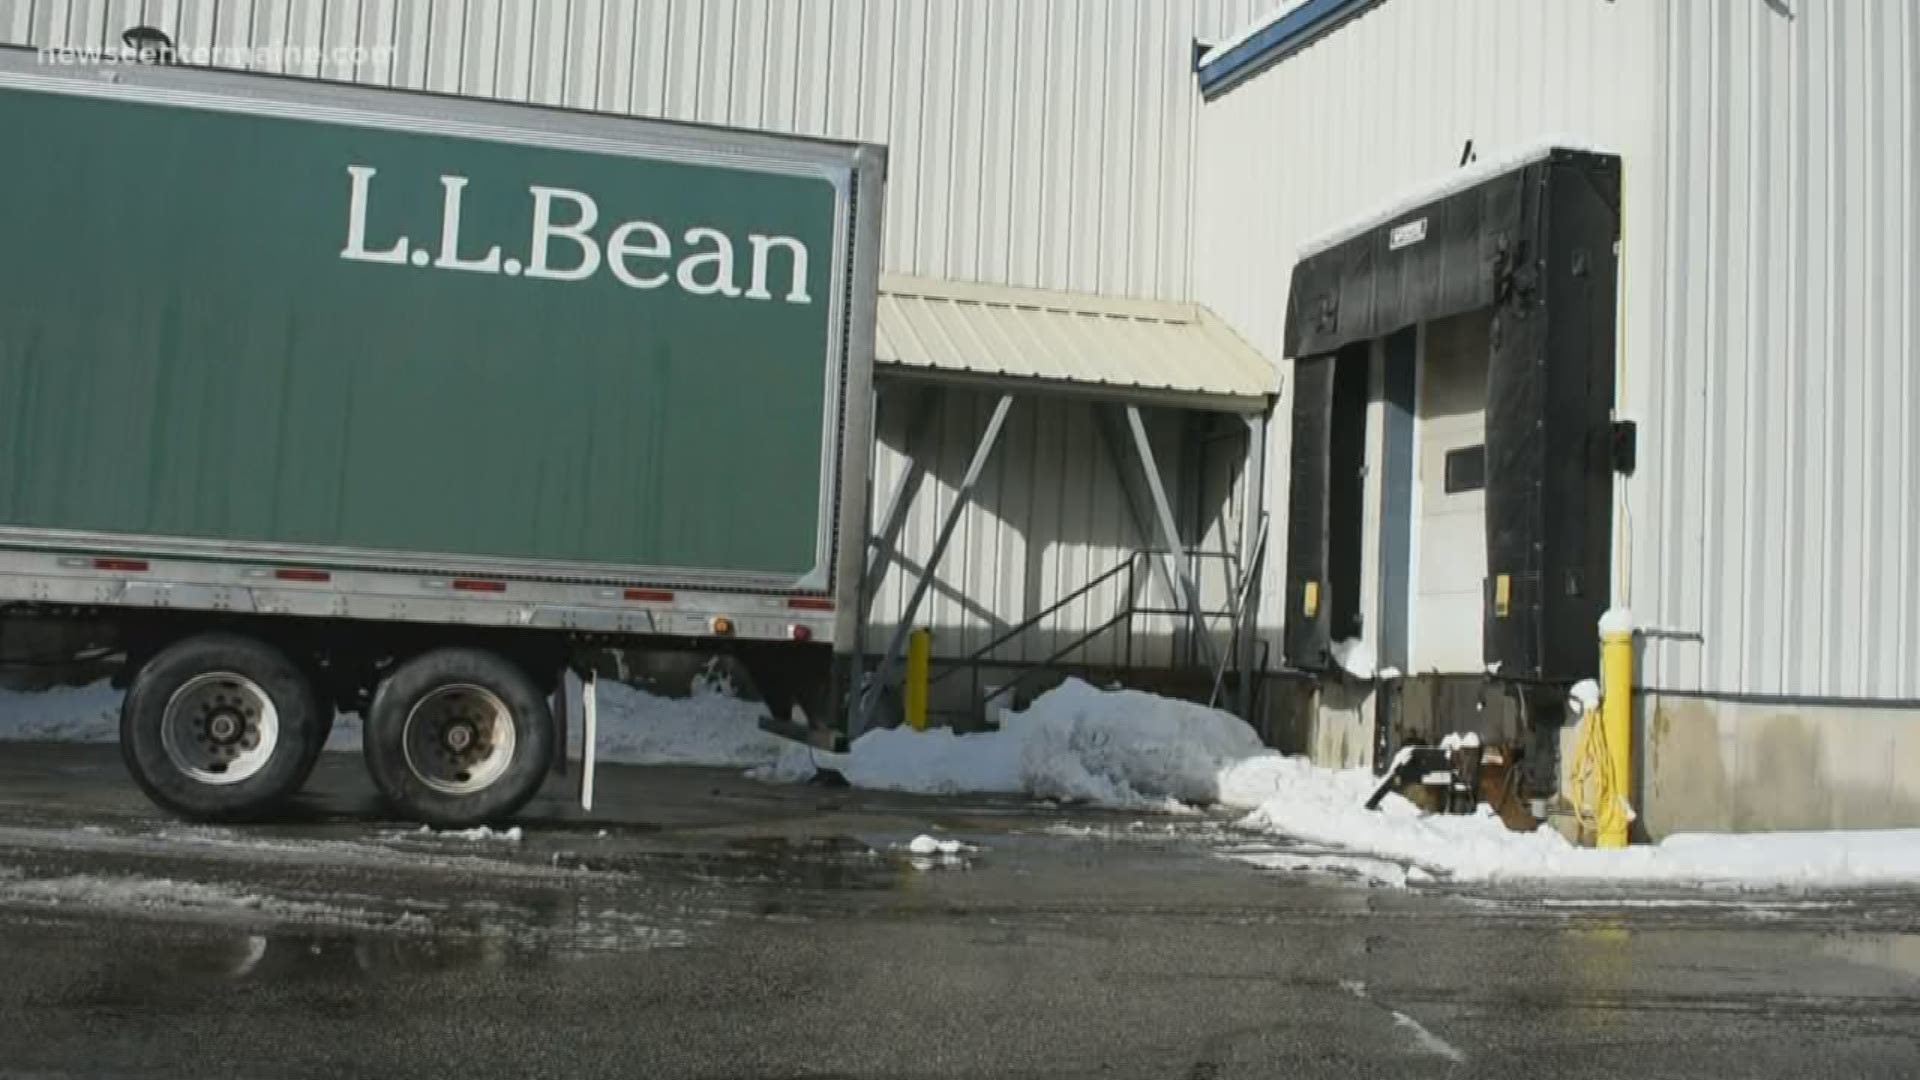 L.L. Bean is using its distribution center to pack food for pantries across the state during the coronavirus pandemic.